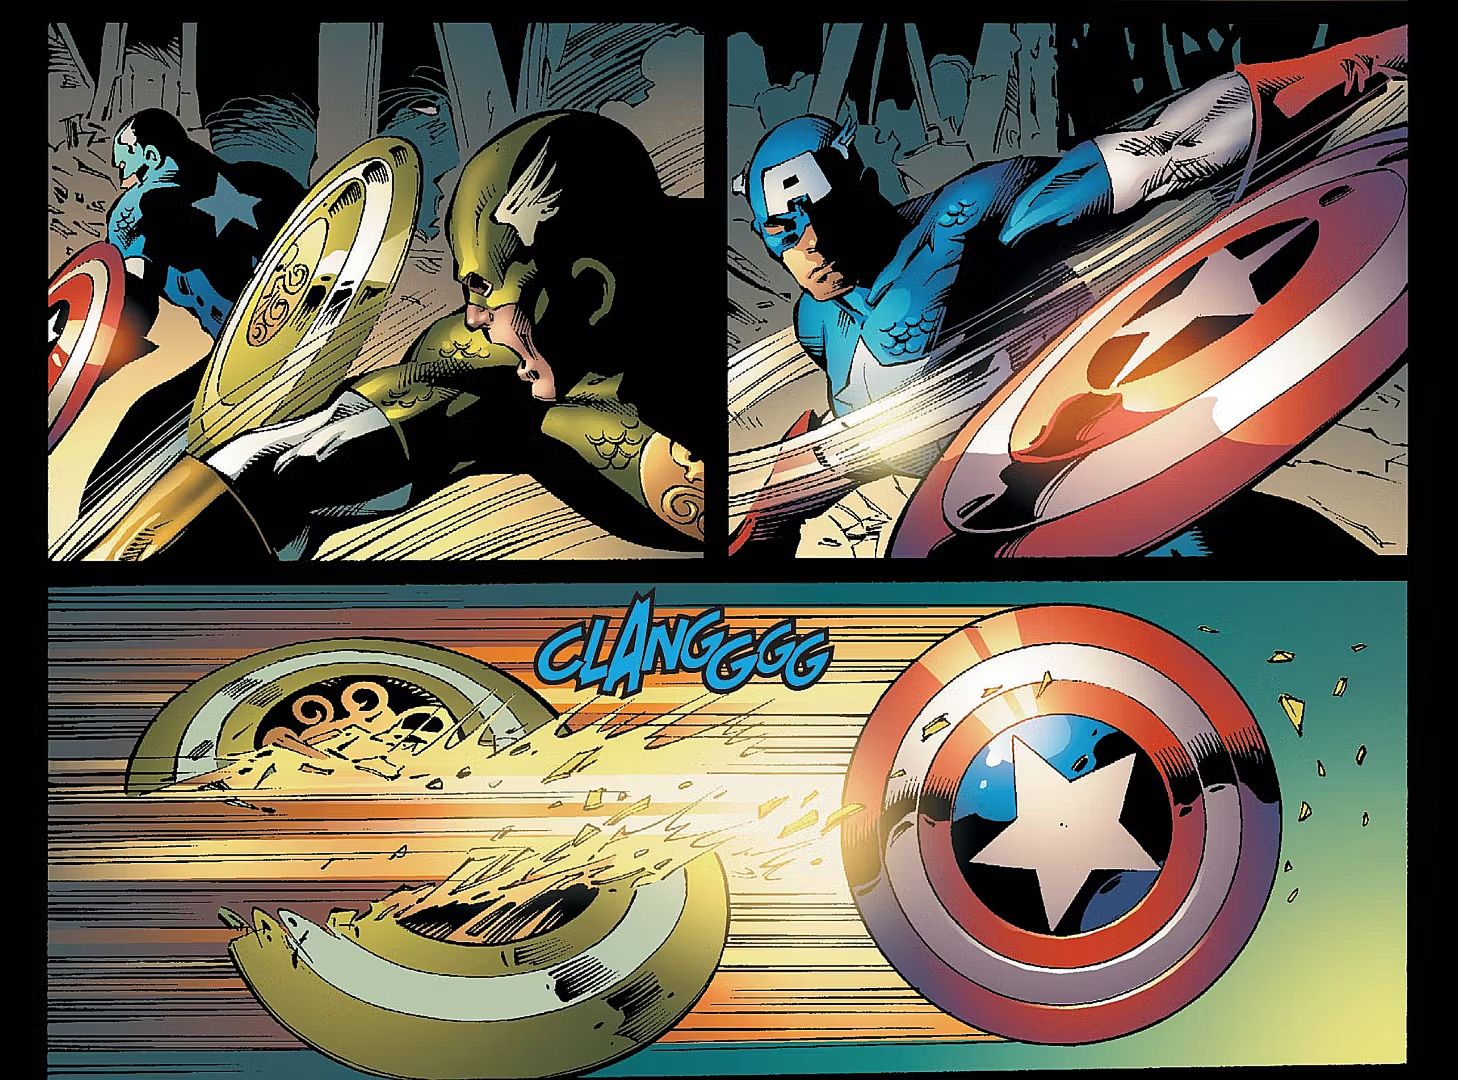 Captain America's shield cuts directly through his Hydra duplicate's inferior copy